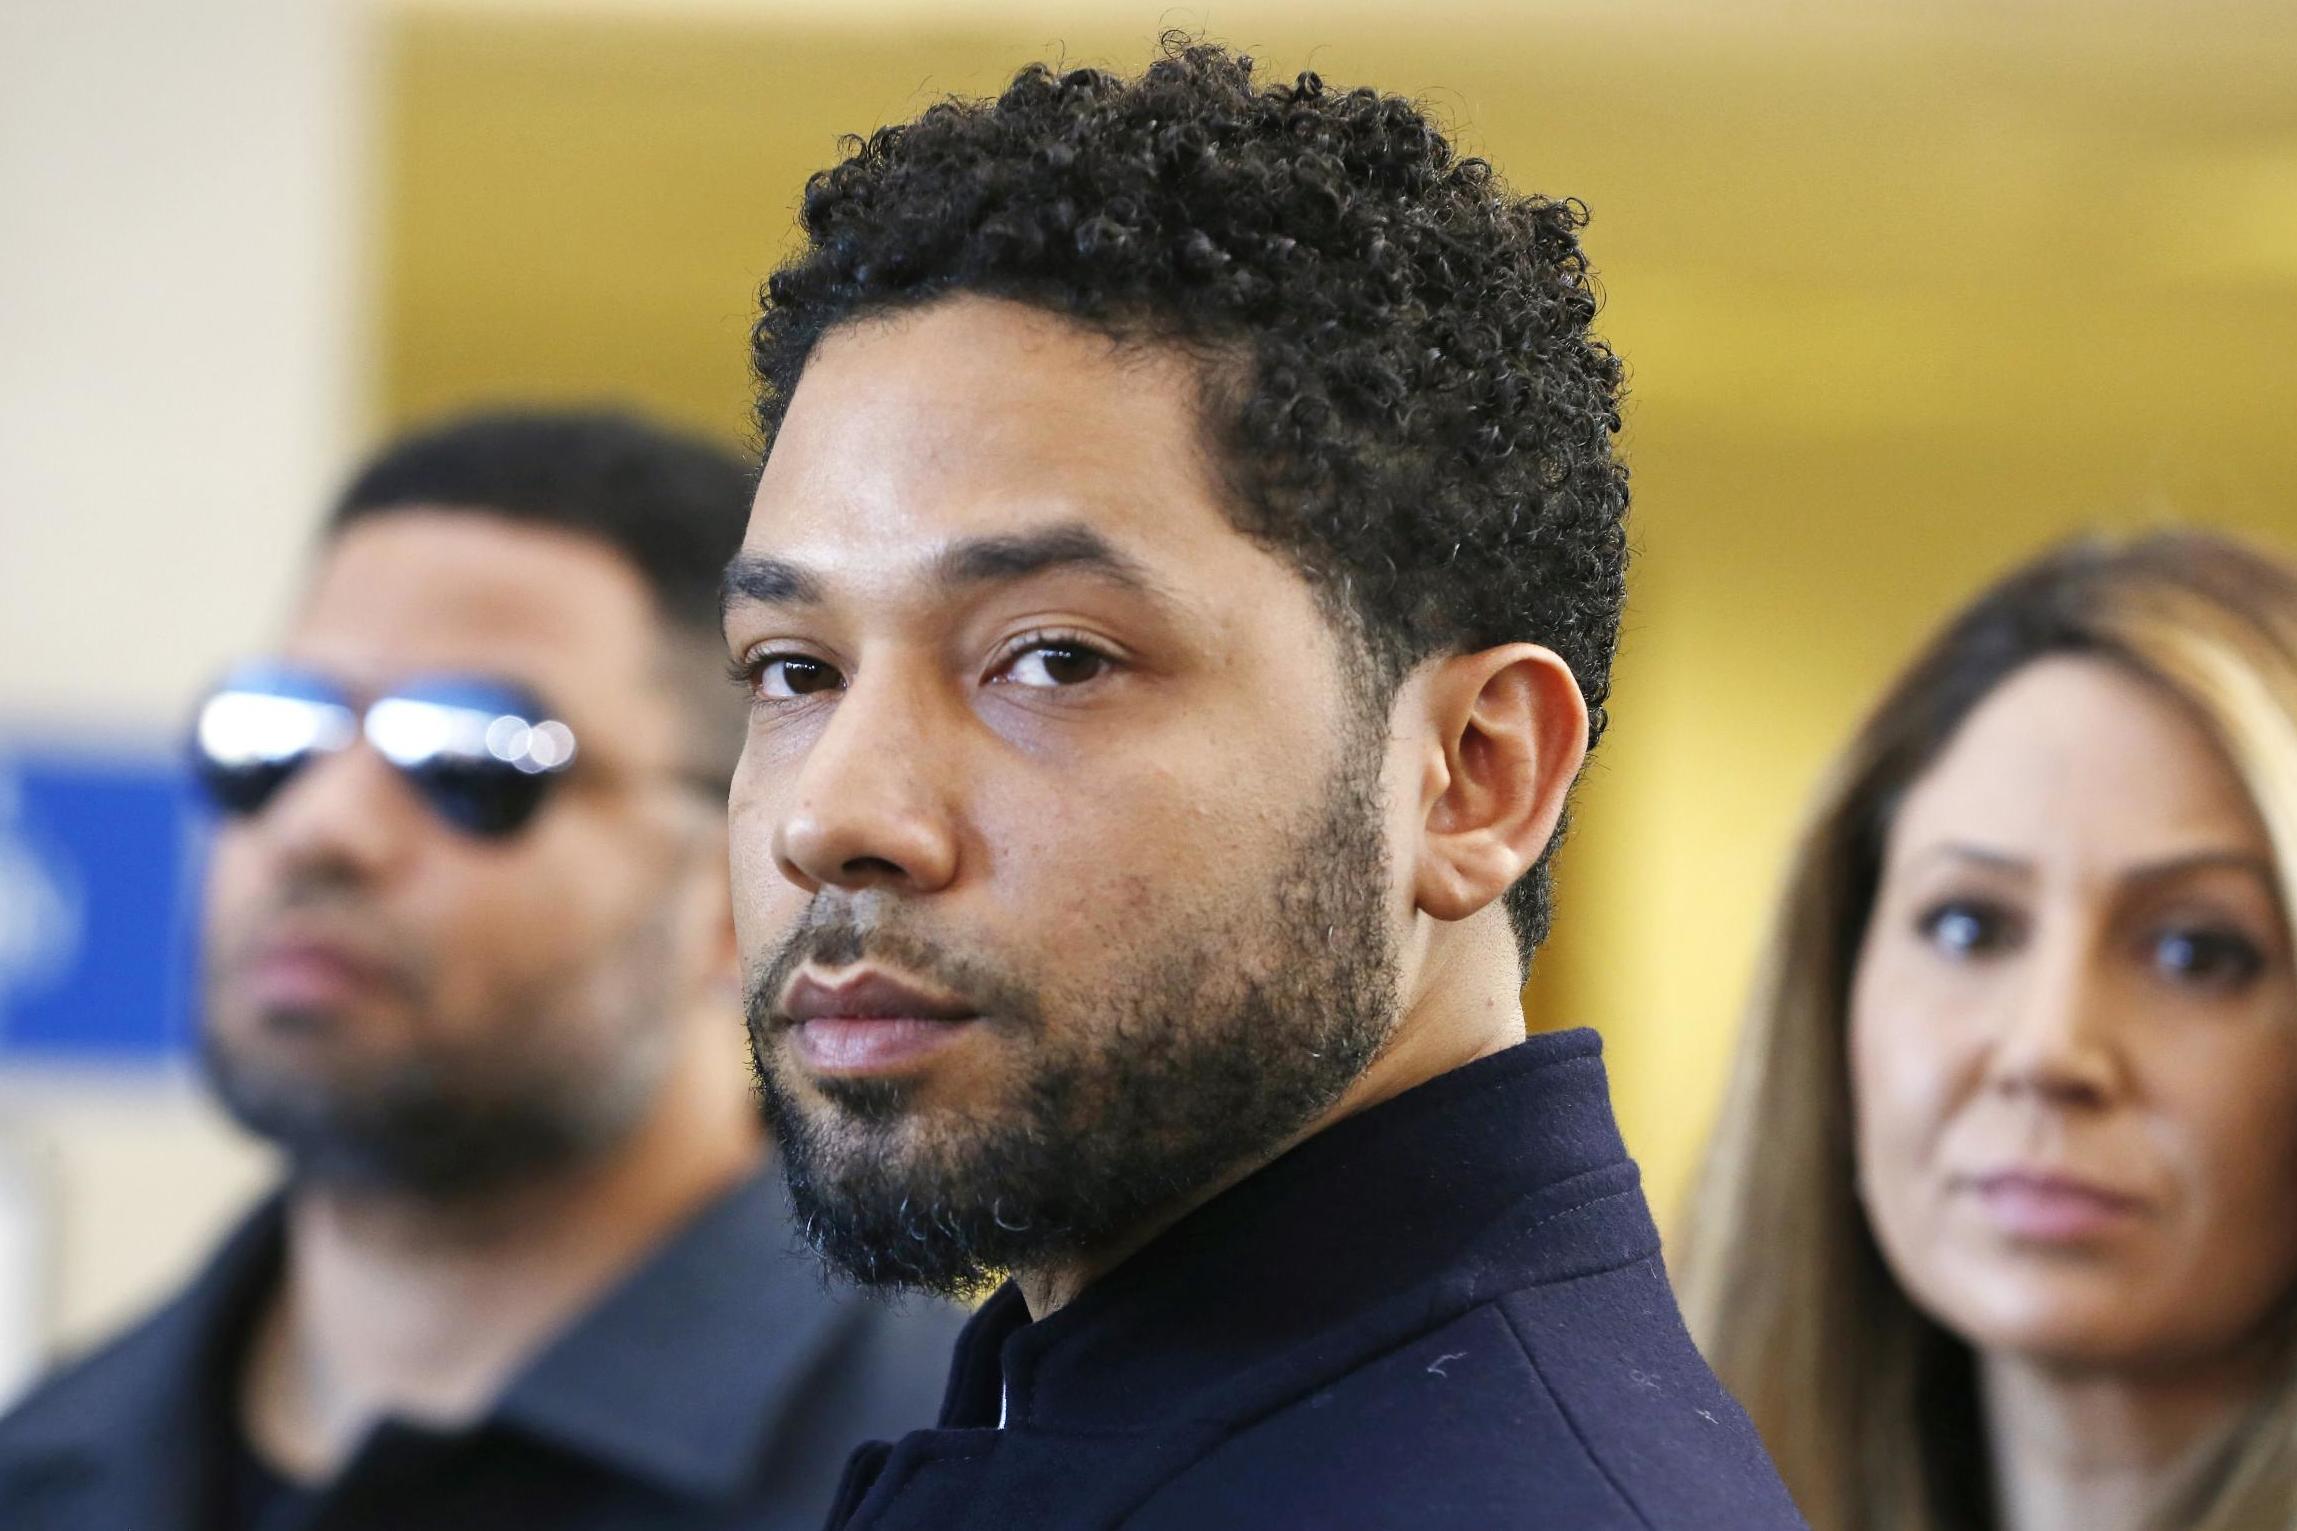 Jussie Smollett was supposed to end Kim Foxx's career. Instead, Cook County made a bold choice